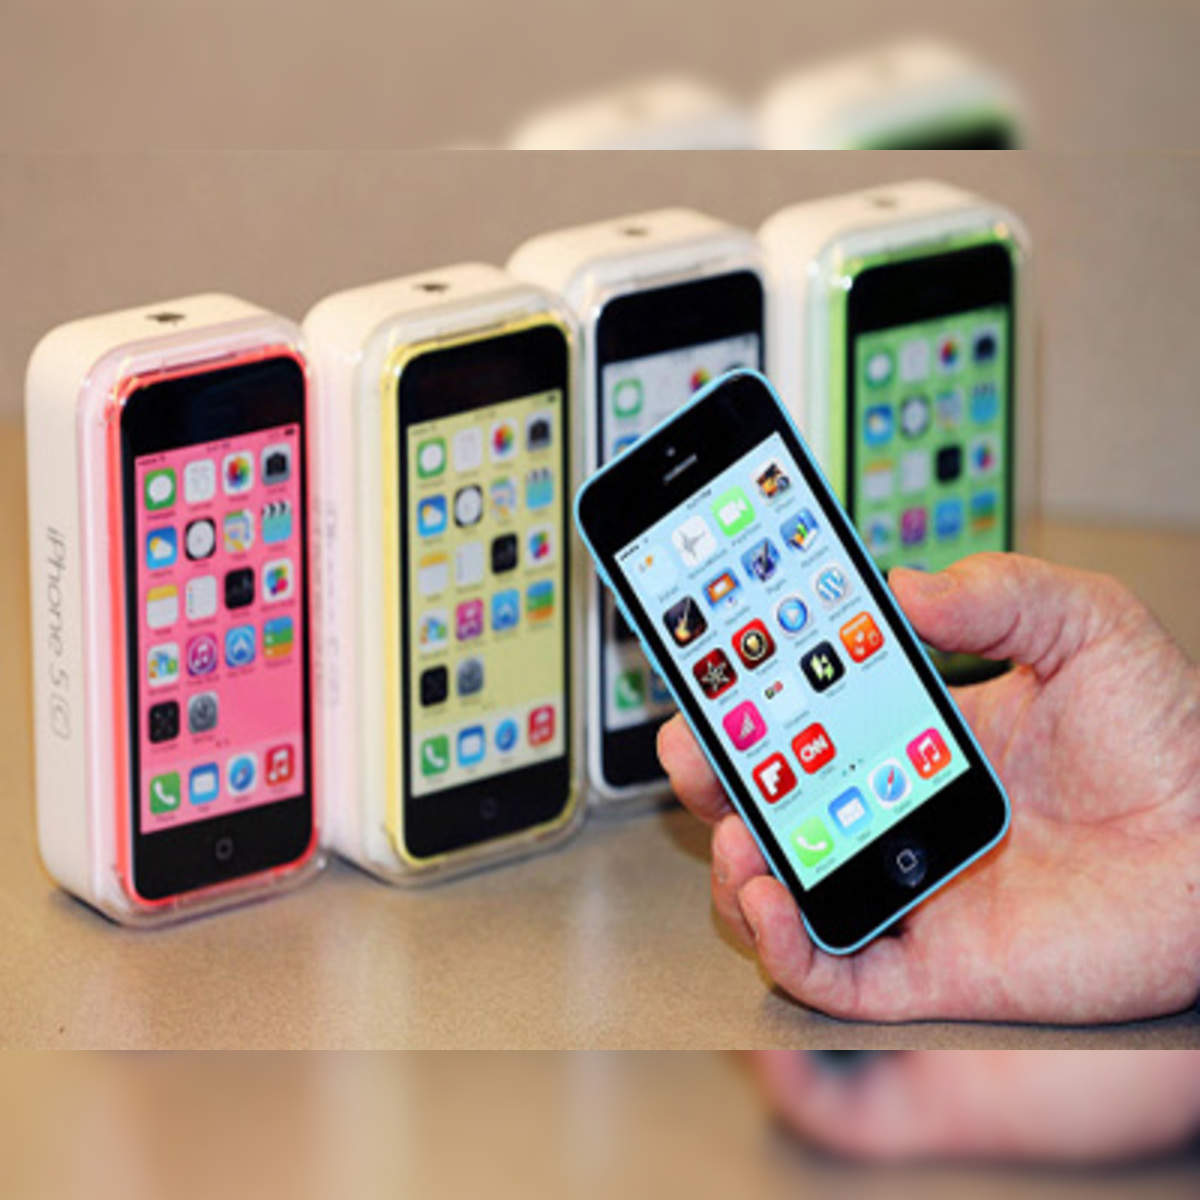 Samsung: Apple plans to launch cheaper 8GB version of iPhone 5C to shore up  sales in India - The Economic Times